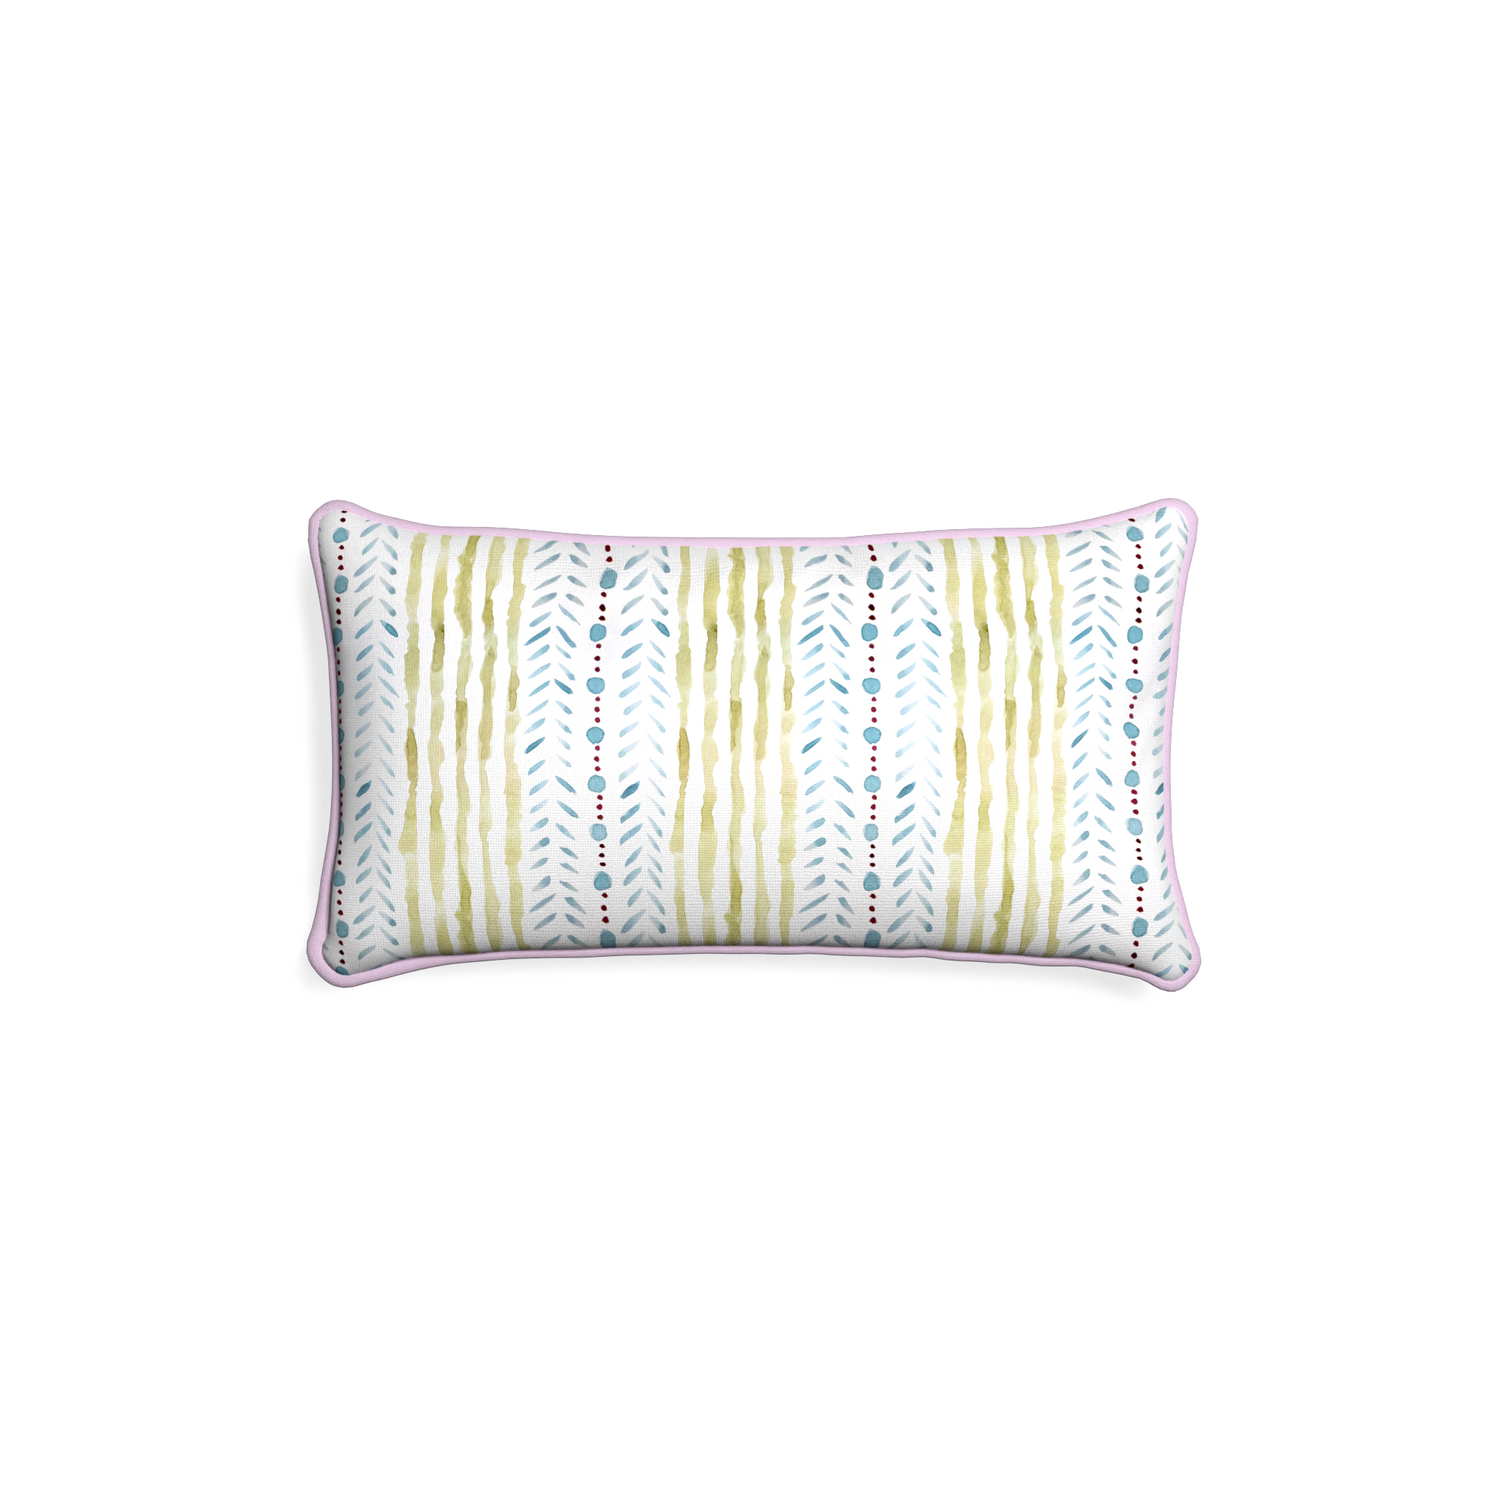 Petite-lumbar julia custom blue & green stripedpillow with l piping on white background